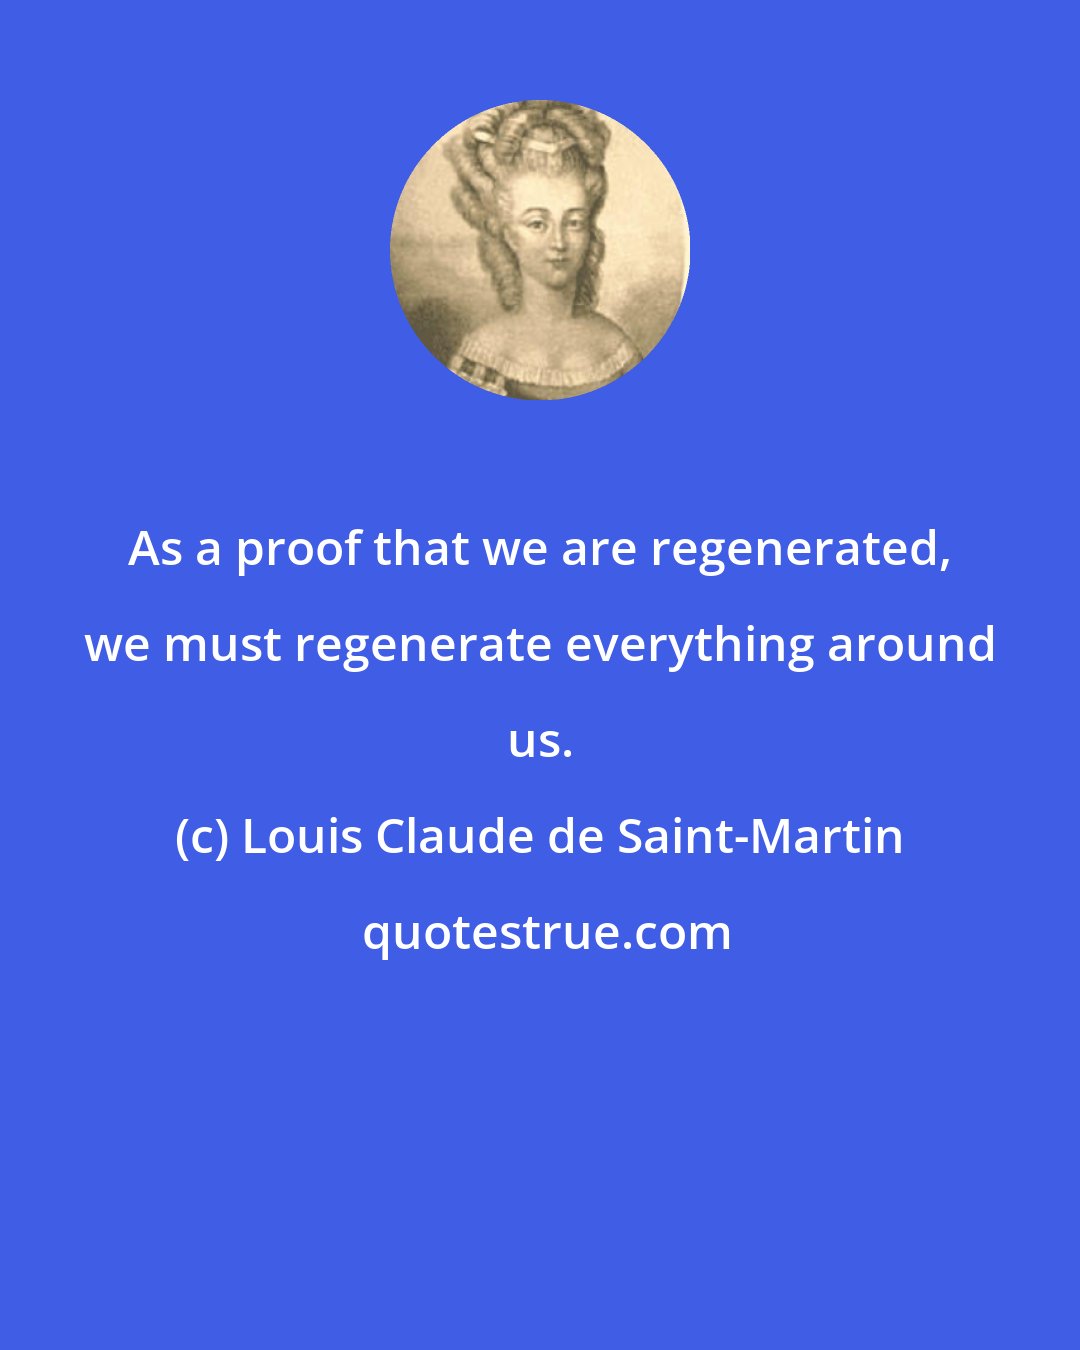 Louis Claude de Saint-Martin: As a proof that we are regenerated, we must regenerate everything around us.